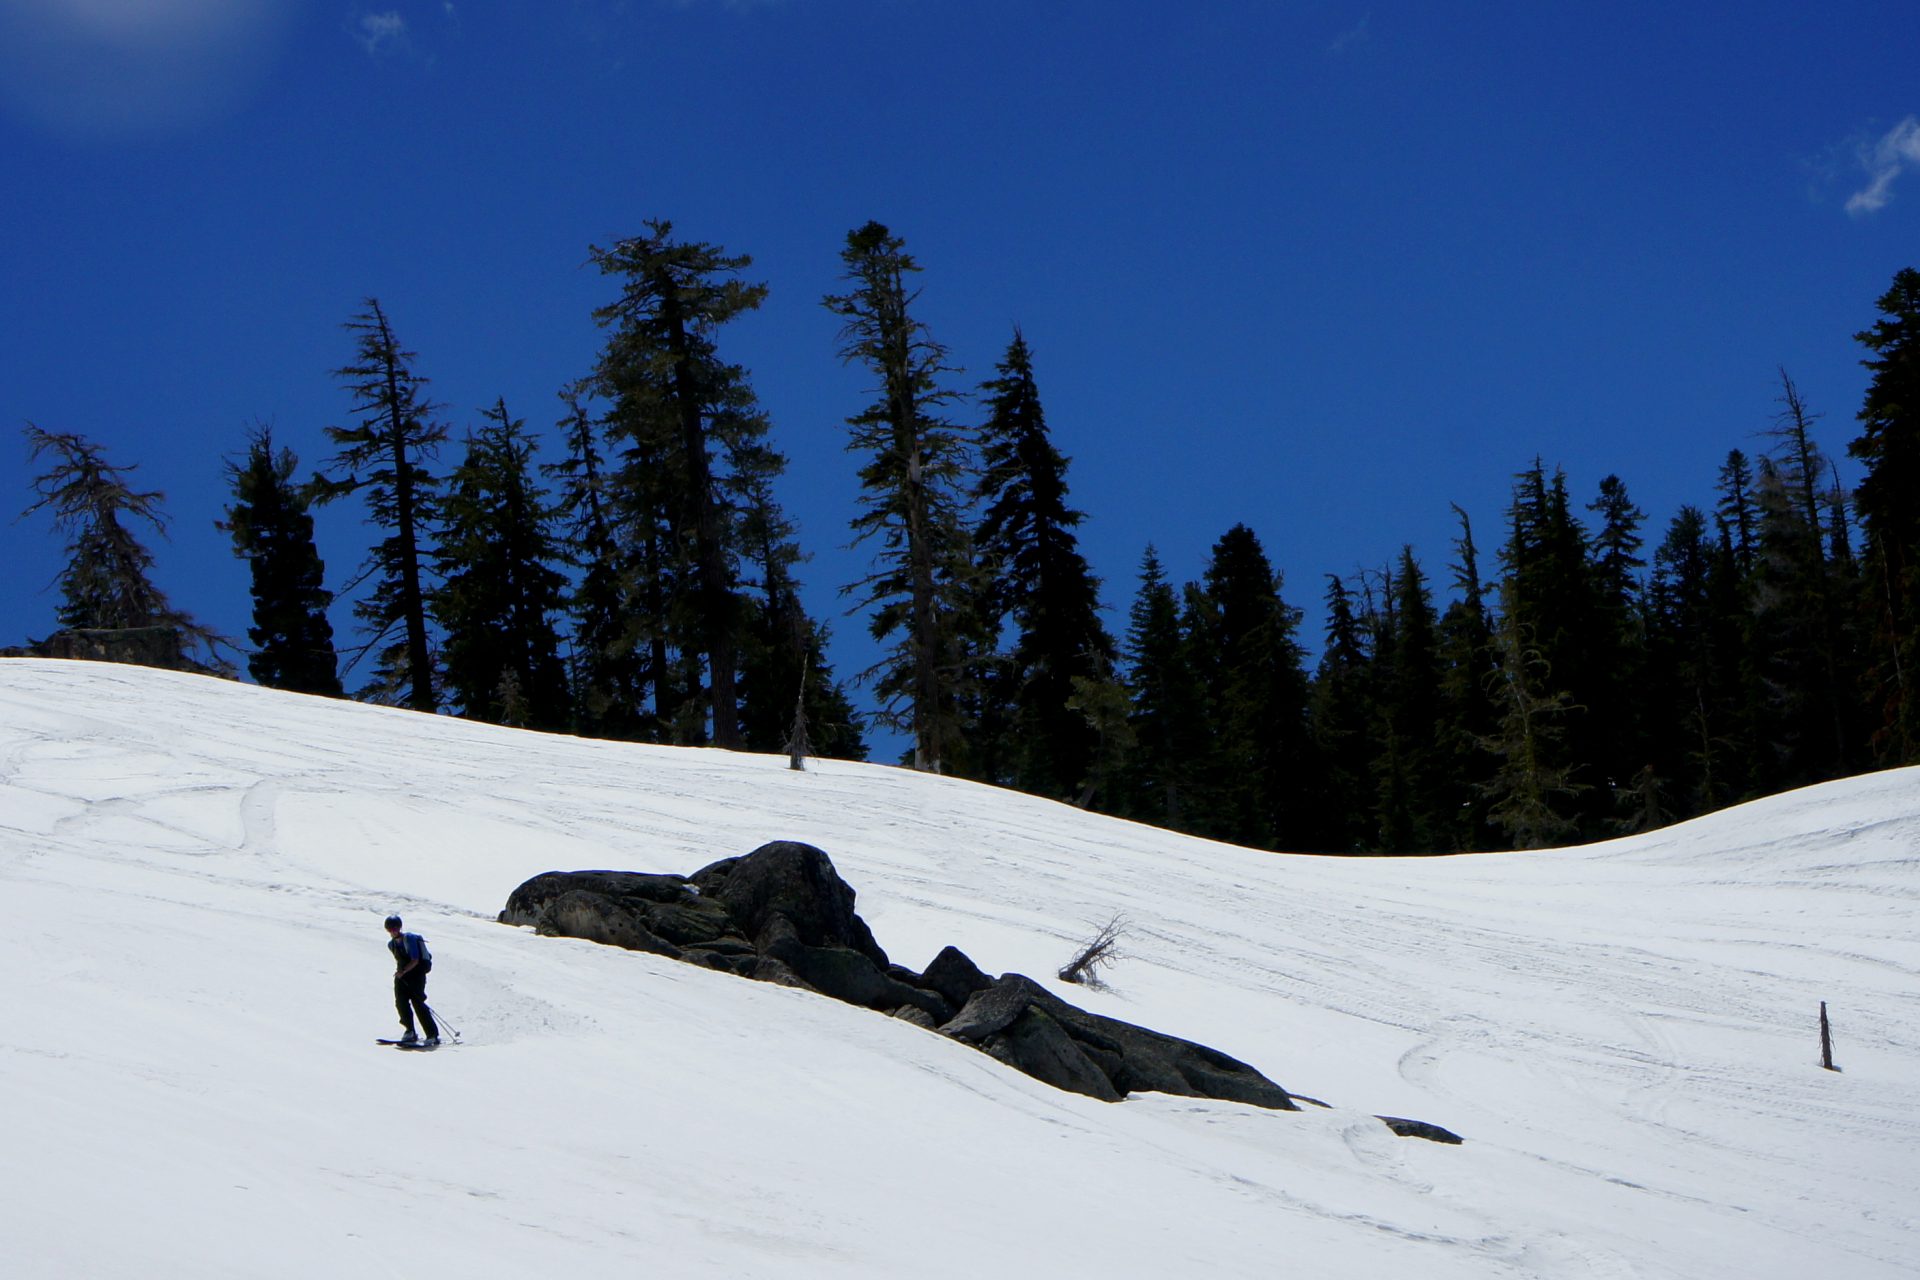 skier in full sun enjoying a low angle bowl with large trees in the background